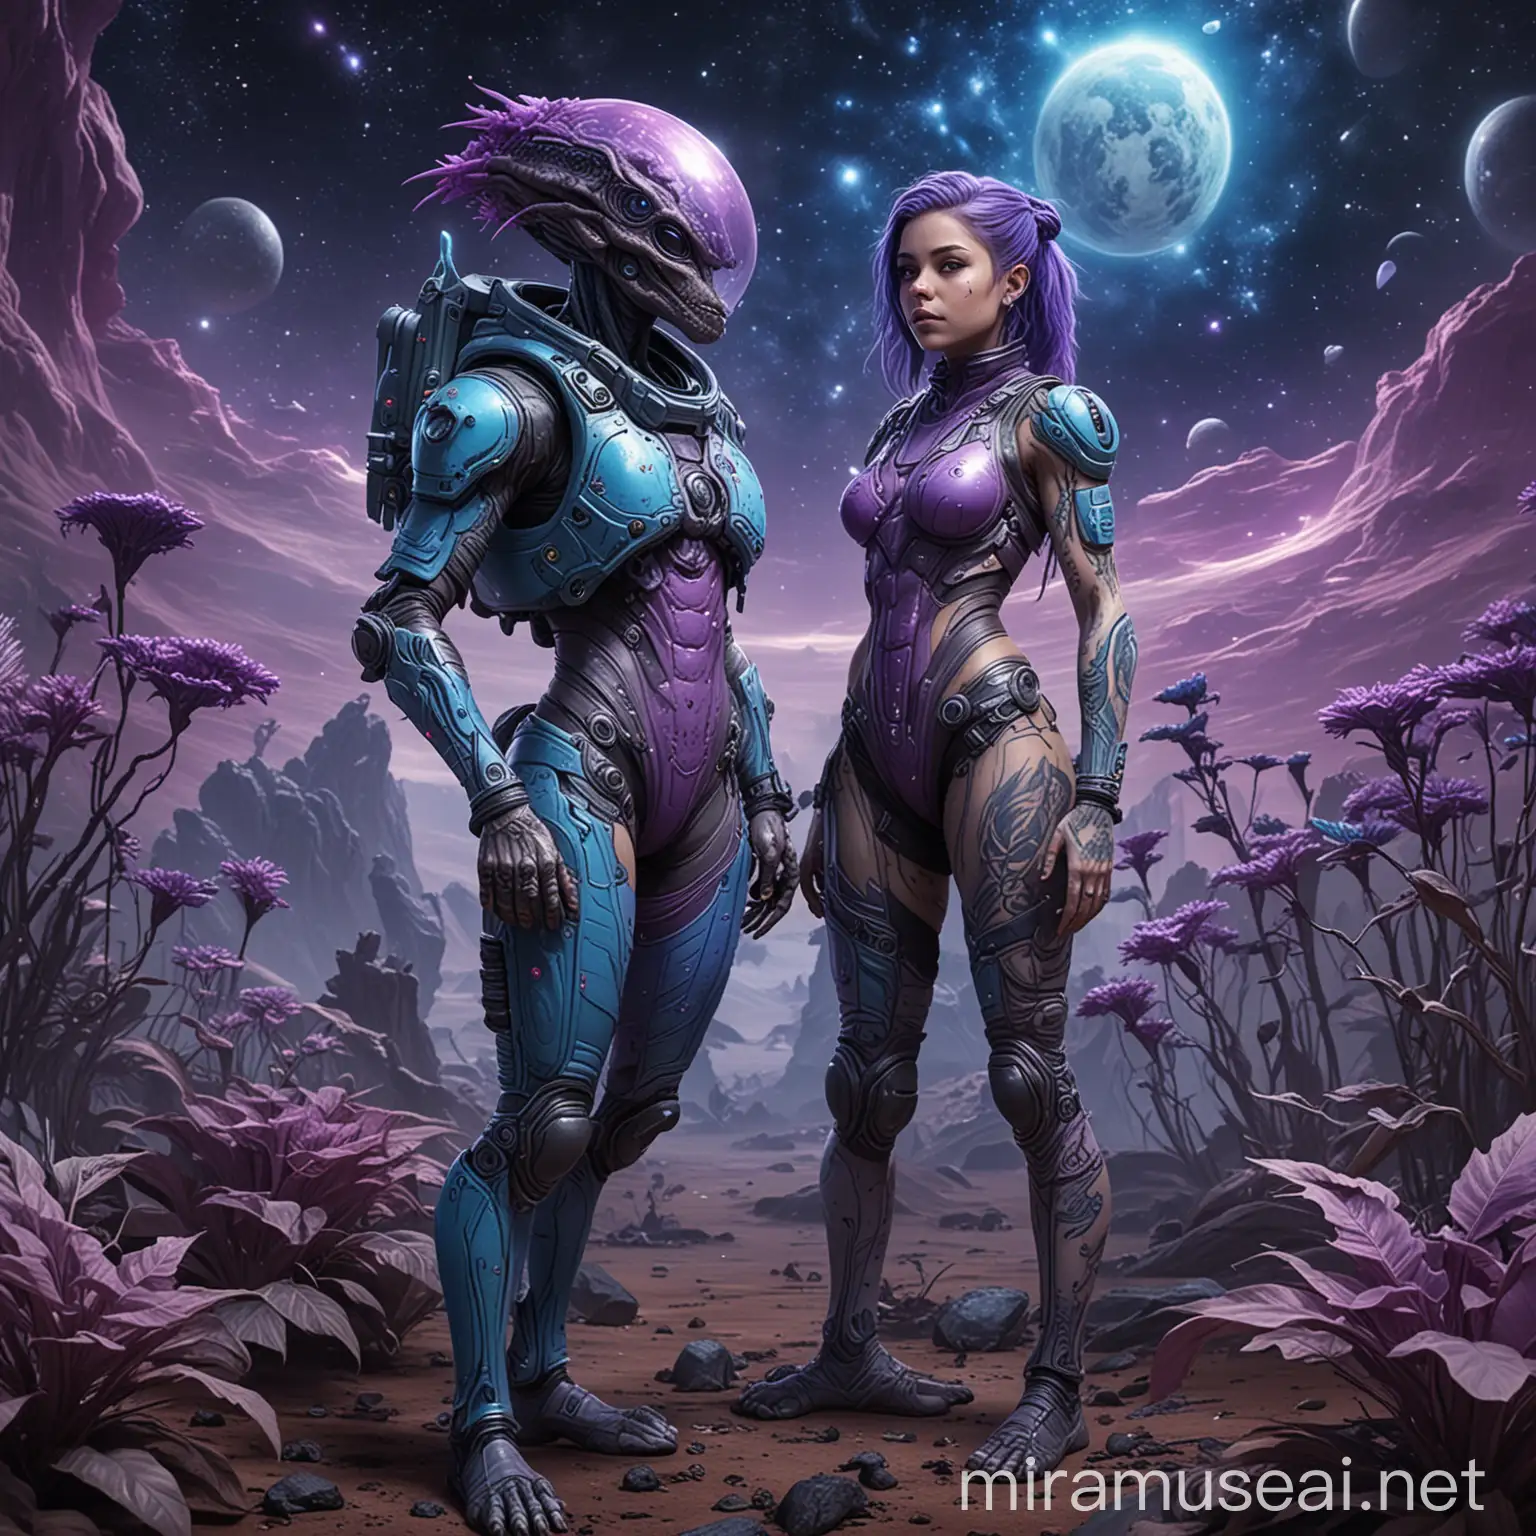 Female Scout Exploring Alien Planet with Cute Grey Creature